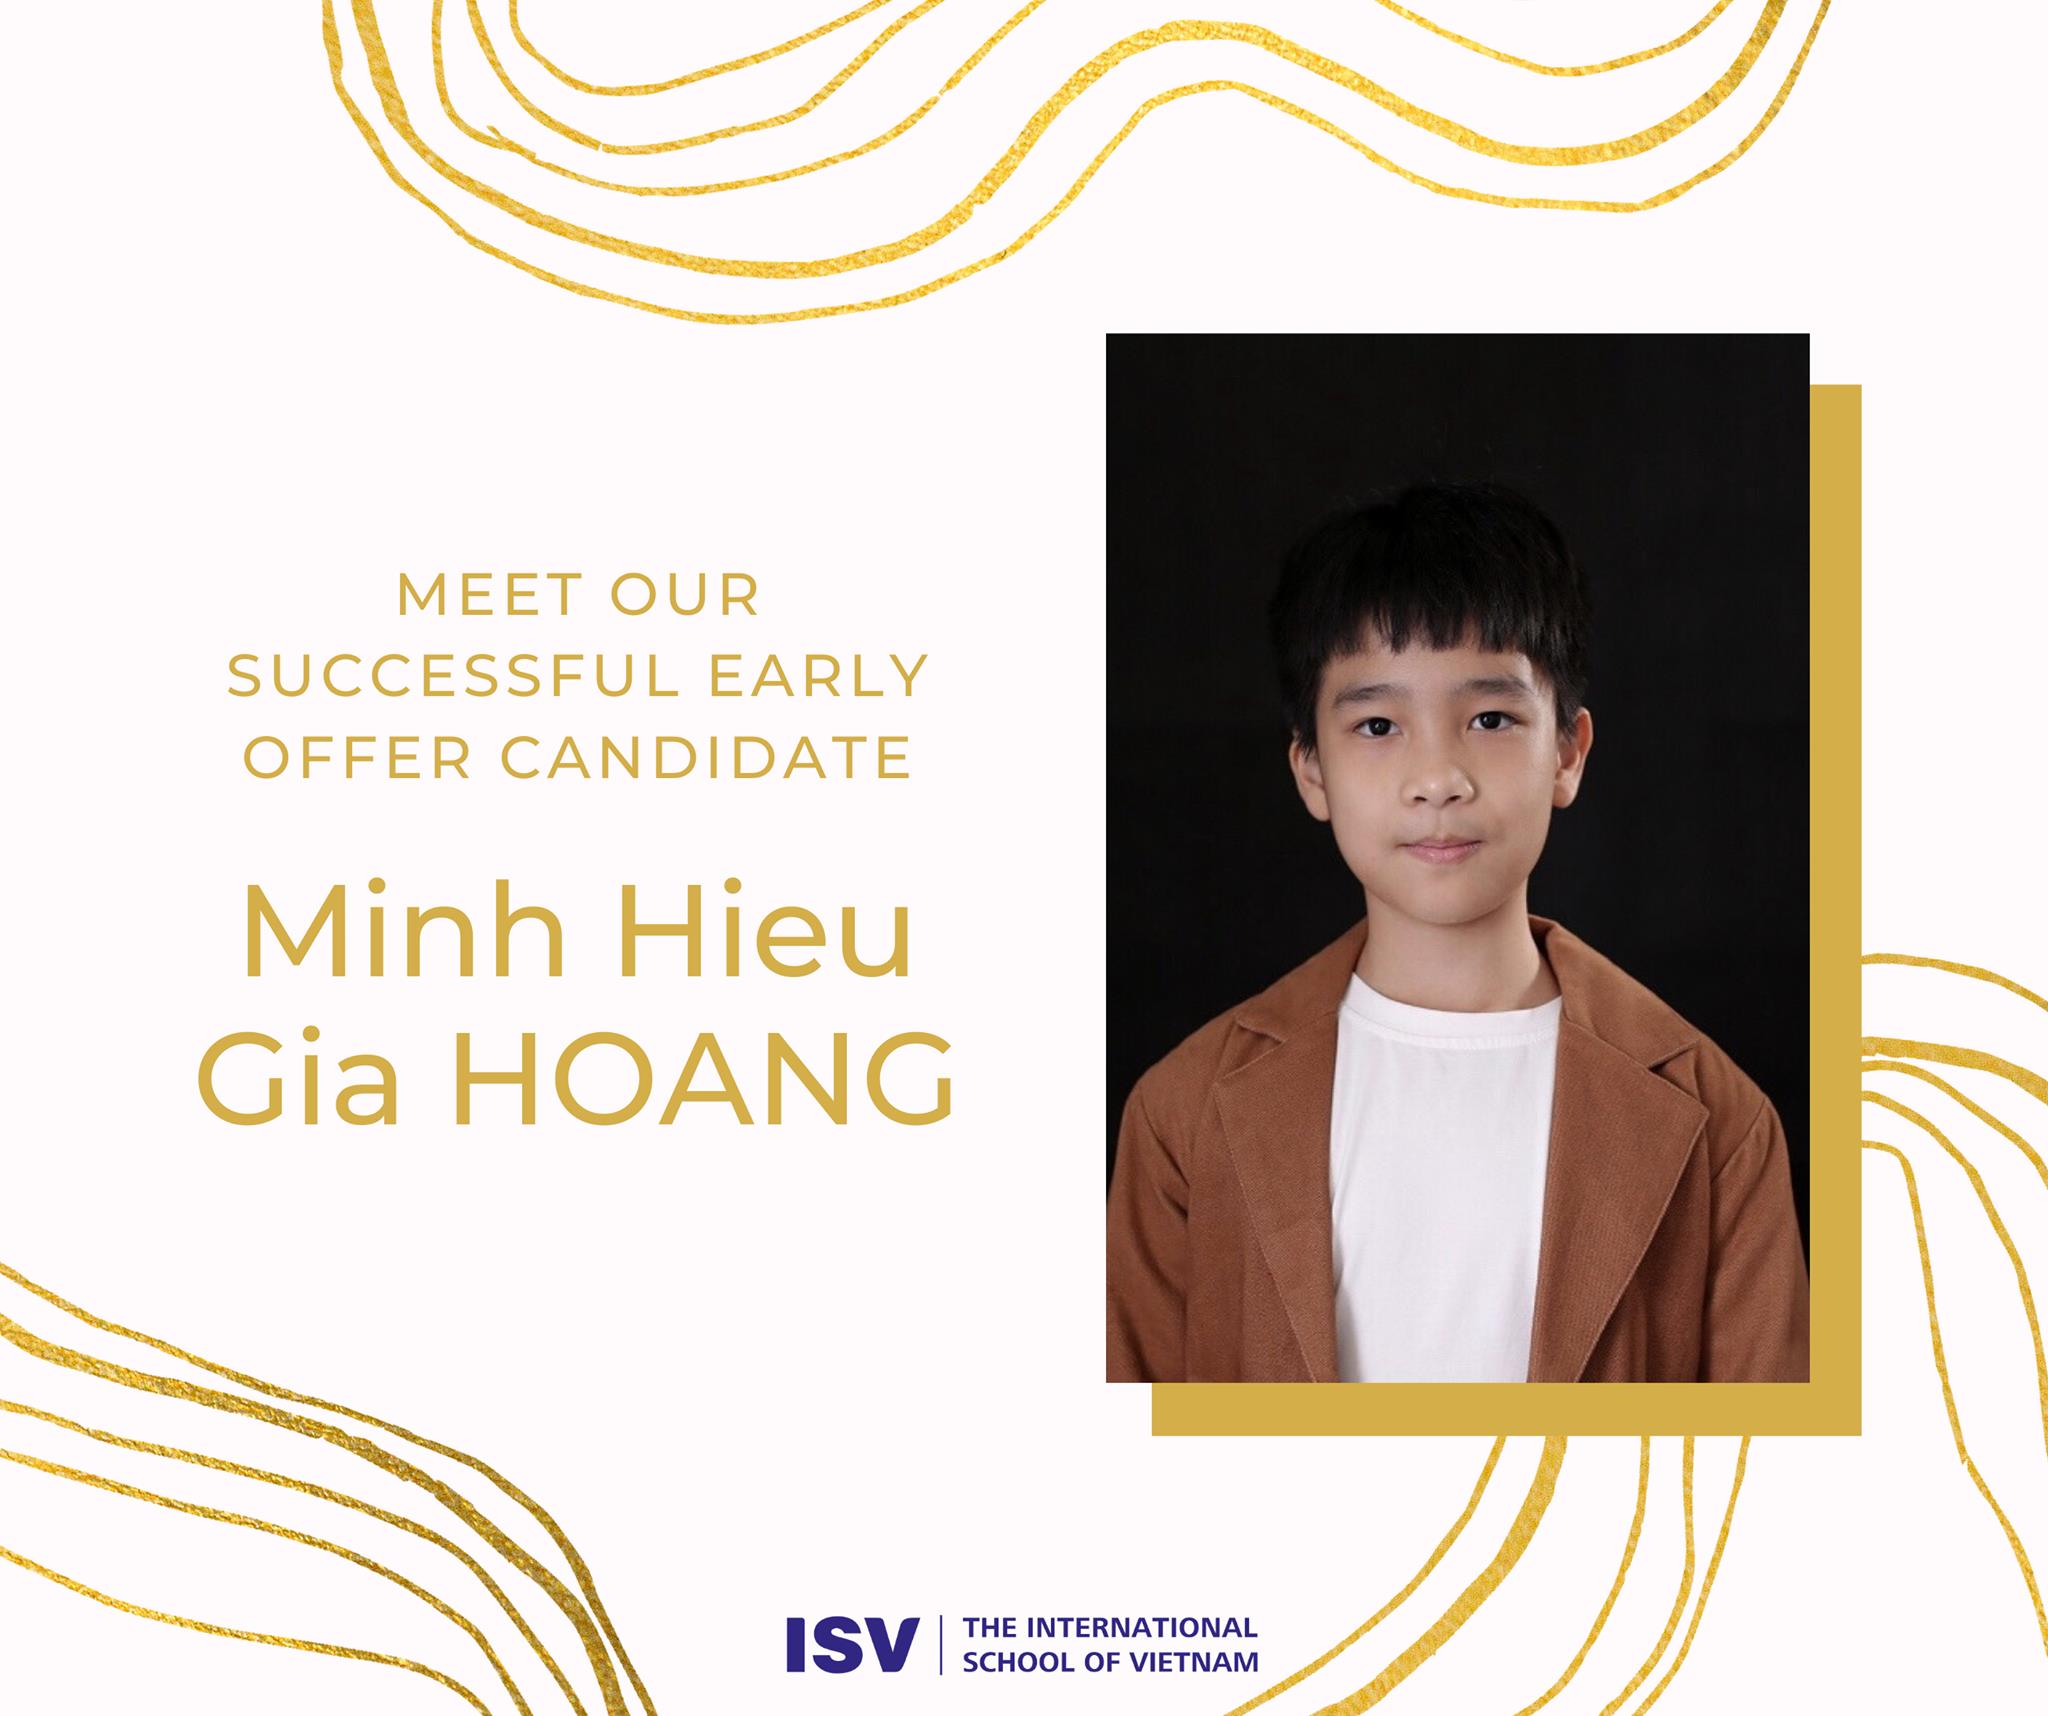 Meet our Successful Early Offer Candidate - Minh Hieu Gia HOANG